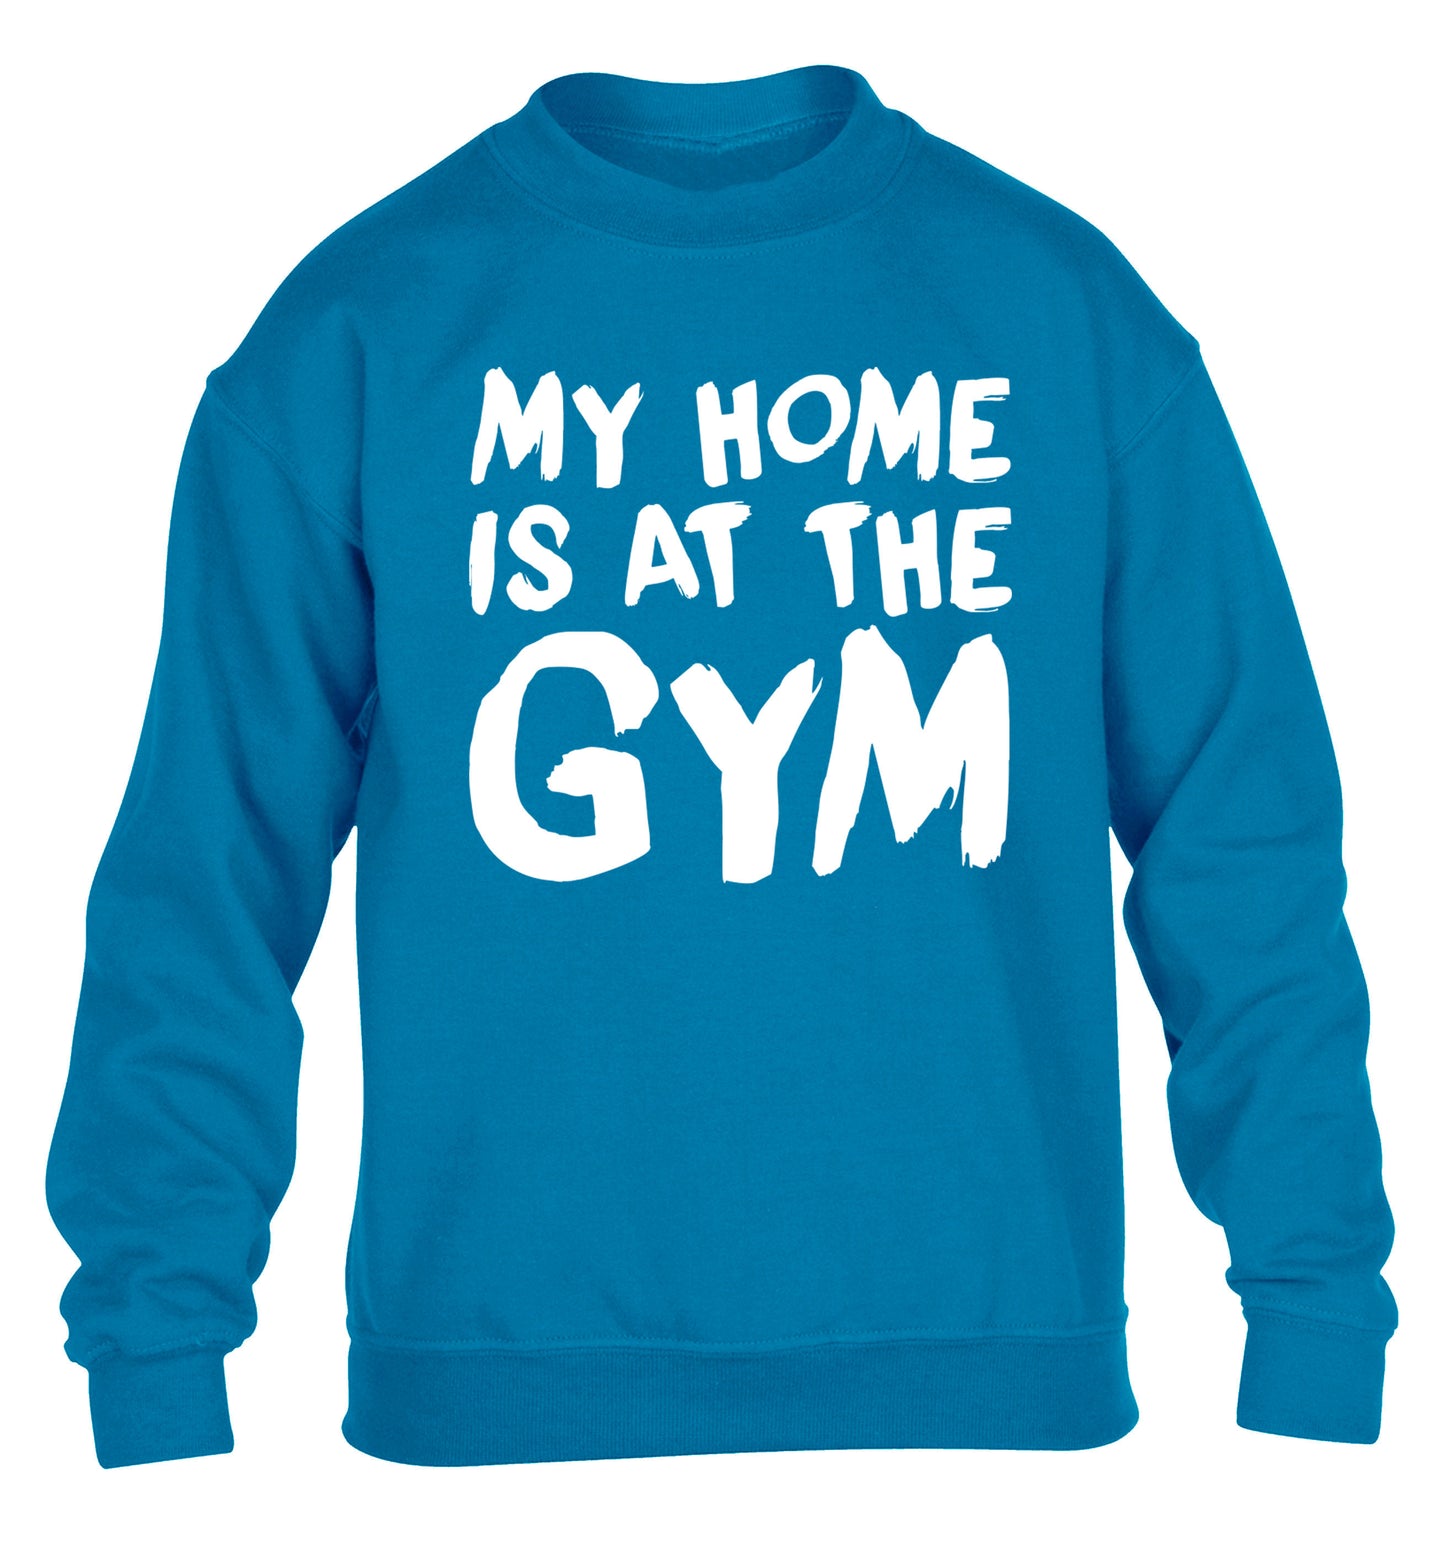 My home is at the gym children's blue sweater 12-14 Years